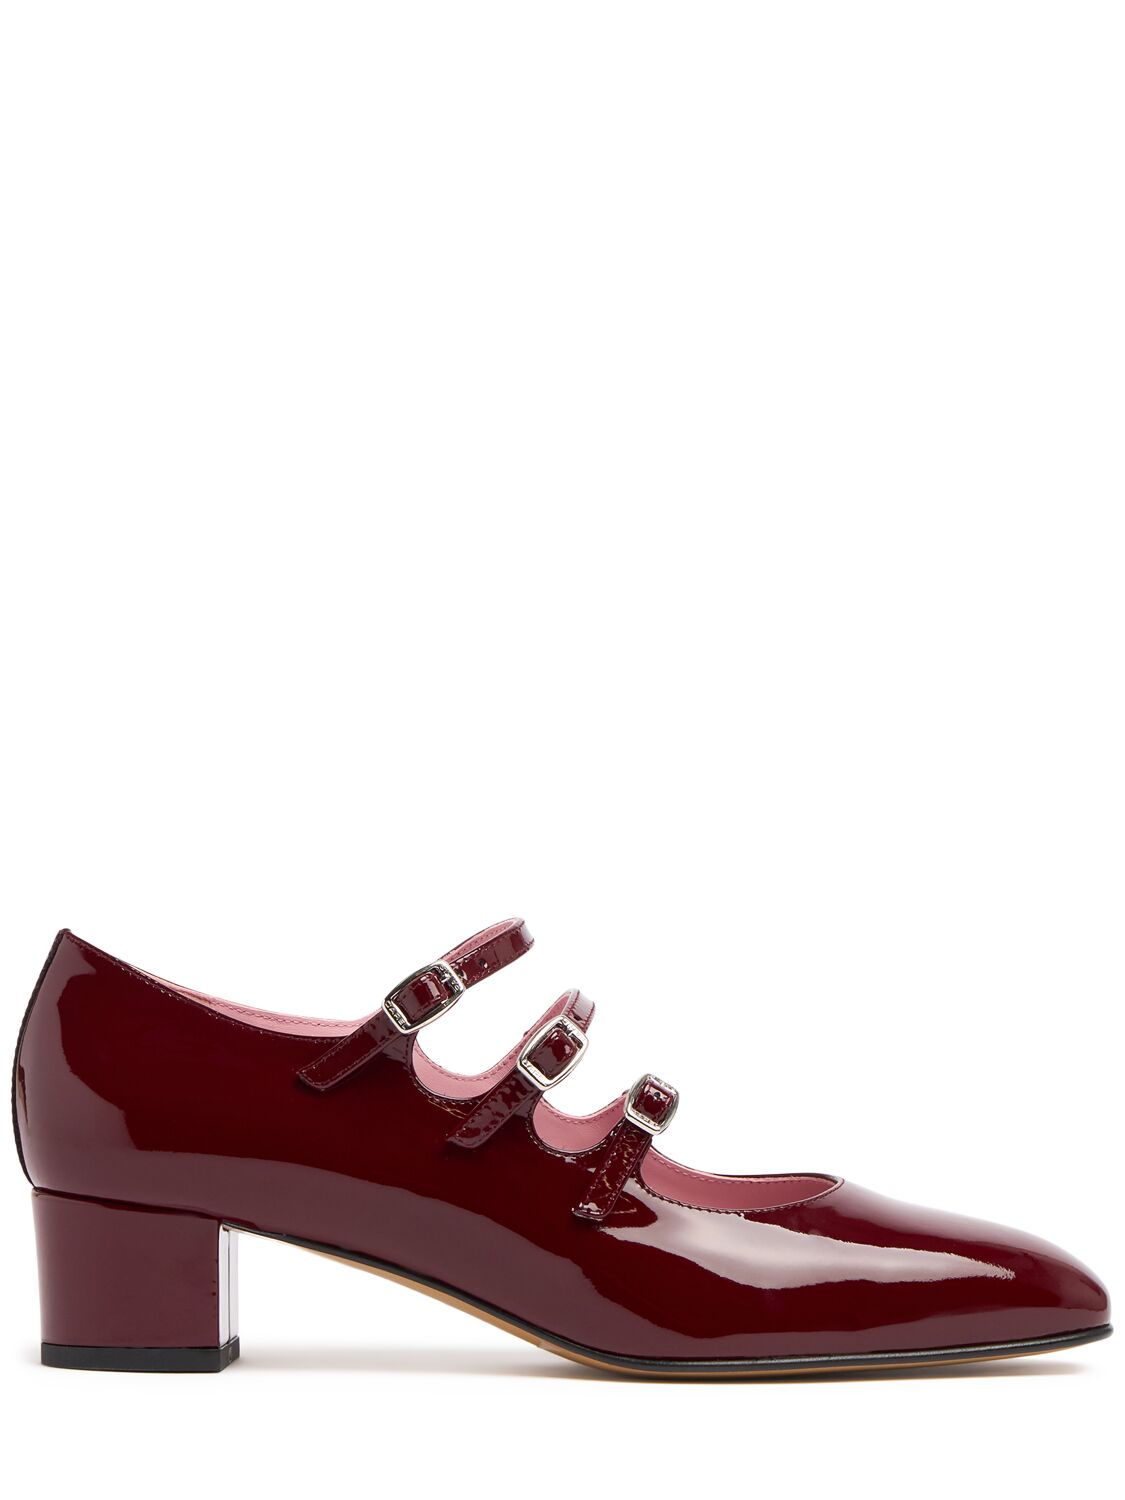 40mm Kina Patent Leather Pumps